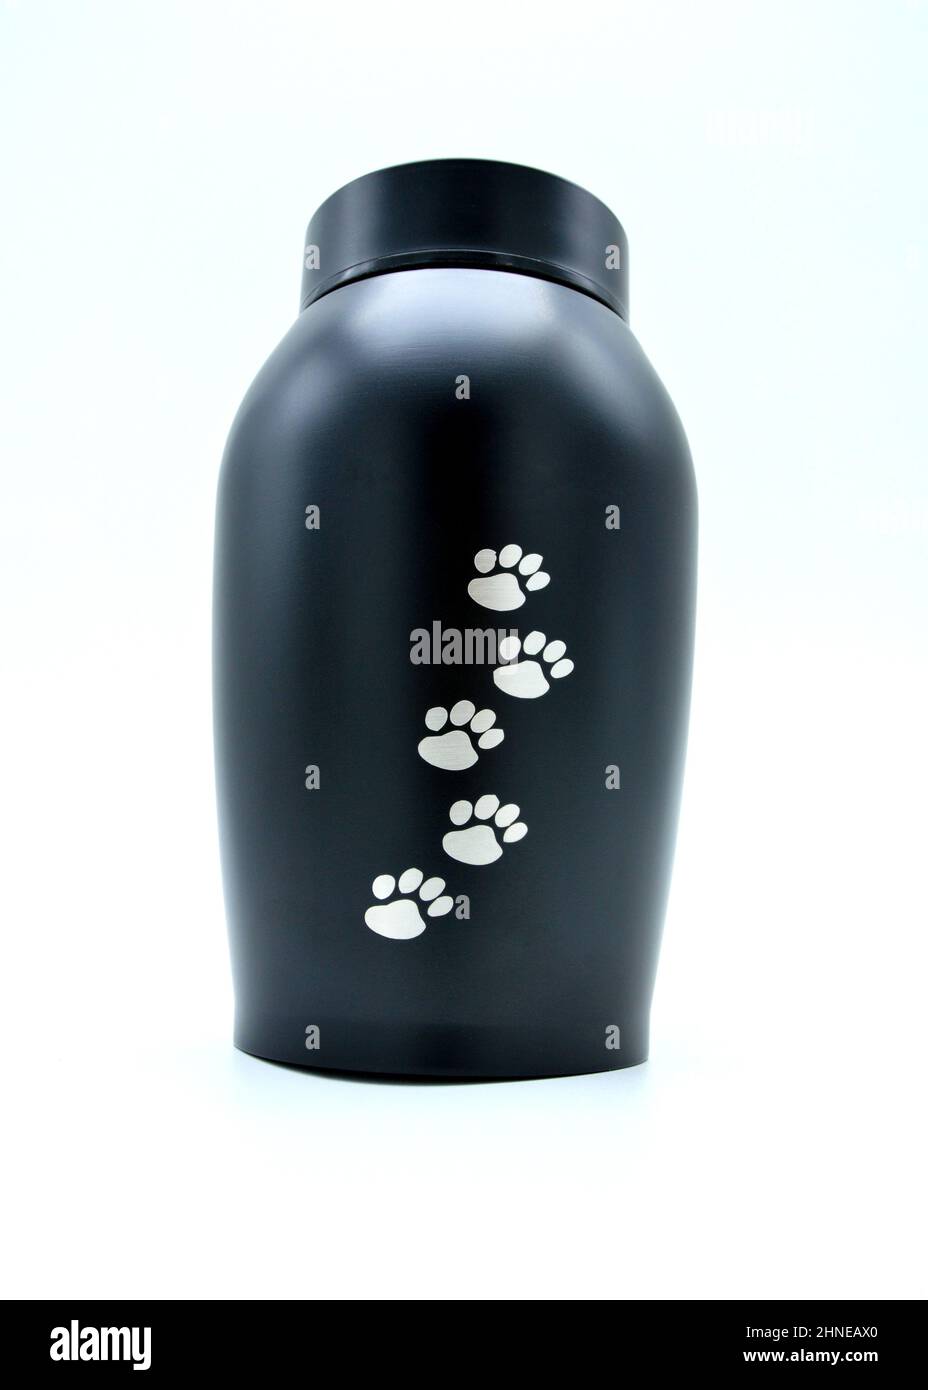 Funeral urn for pets, after the cremation. Stock Photo